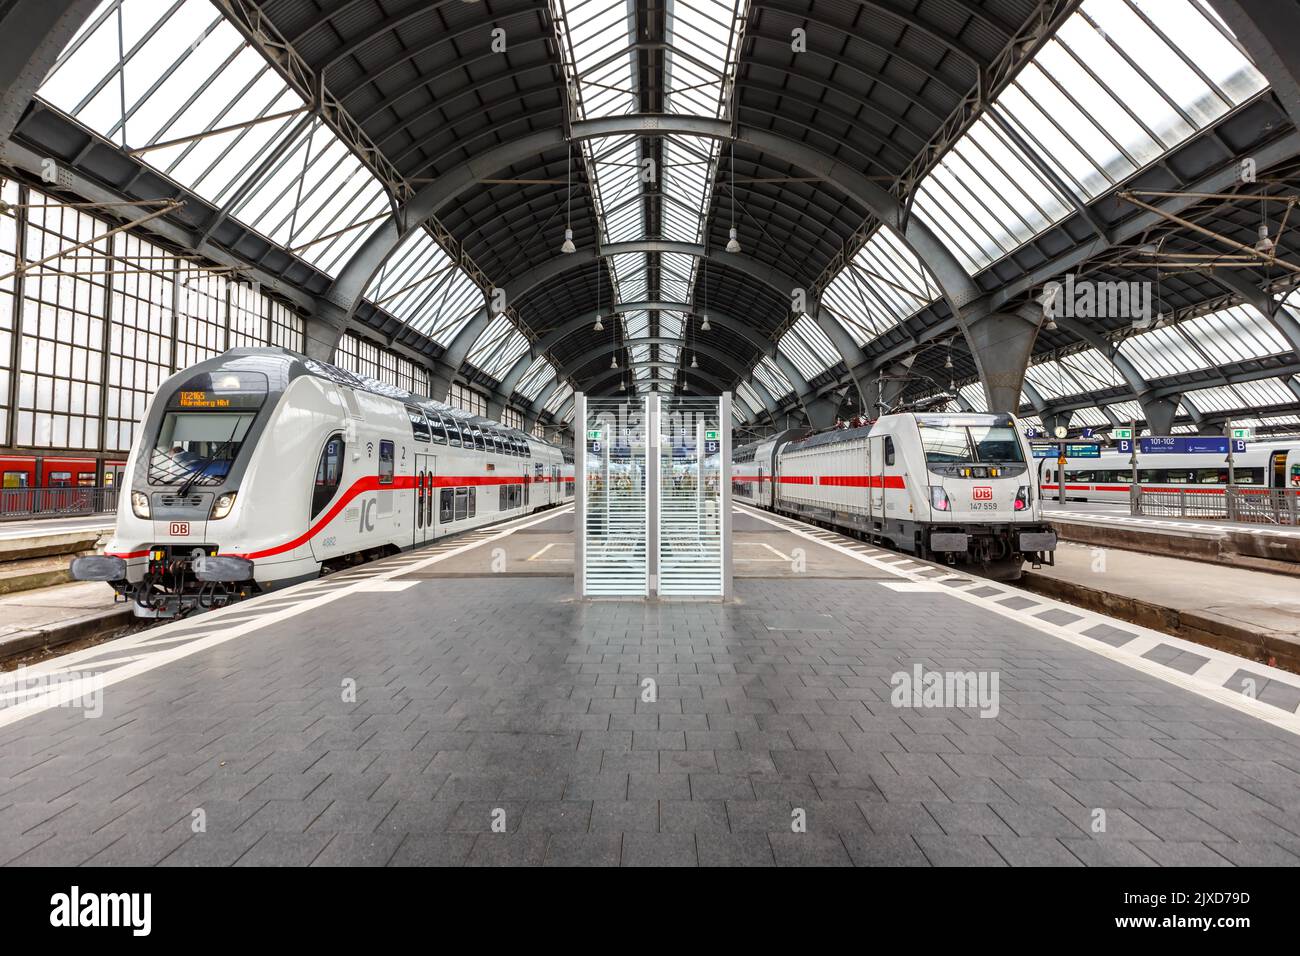 Karlsruhe, Germany - June 30, 2022: InterCity IC trains type Twindexx Vario by Bombardier of DB Deutsche Bahn at main station in Karlsruhe, Germany. Stock Photo